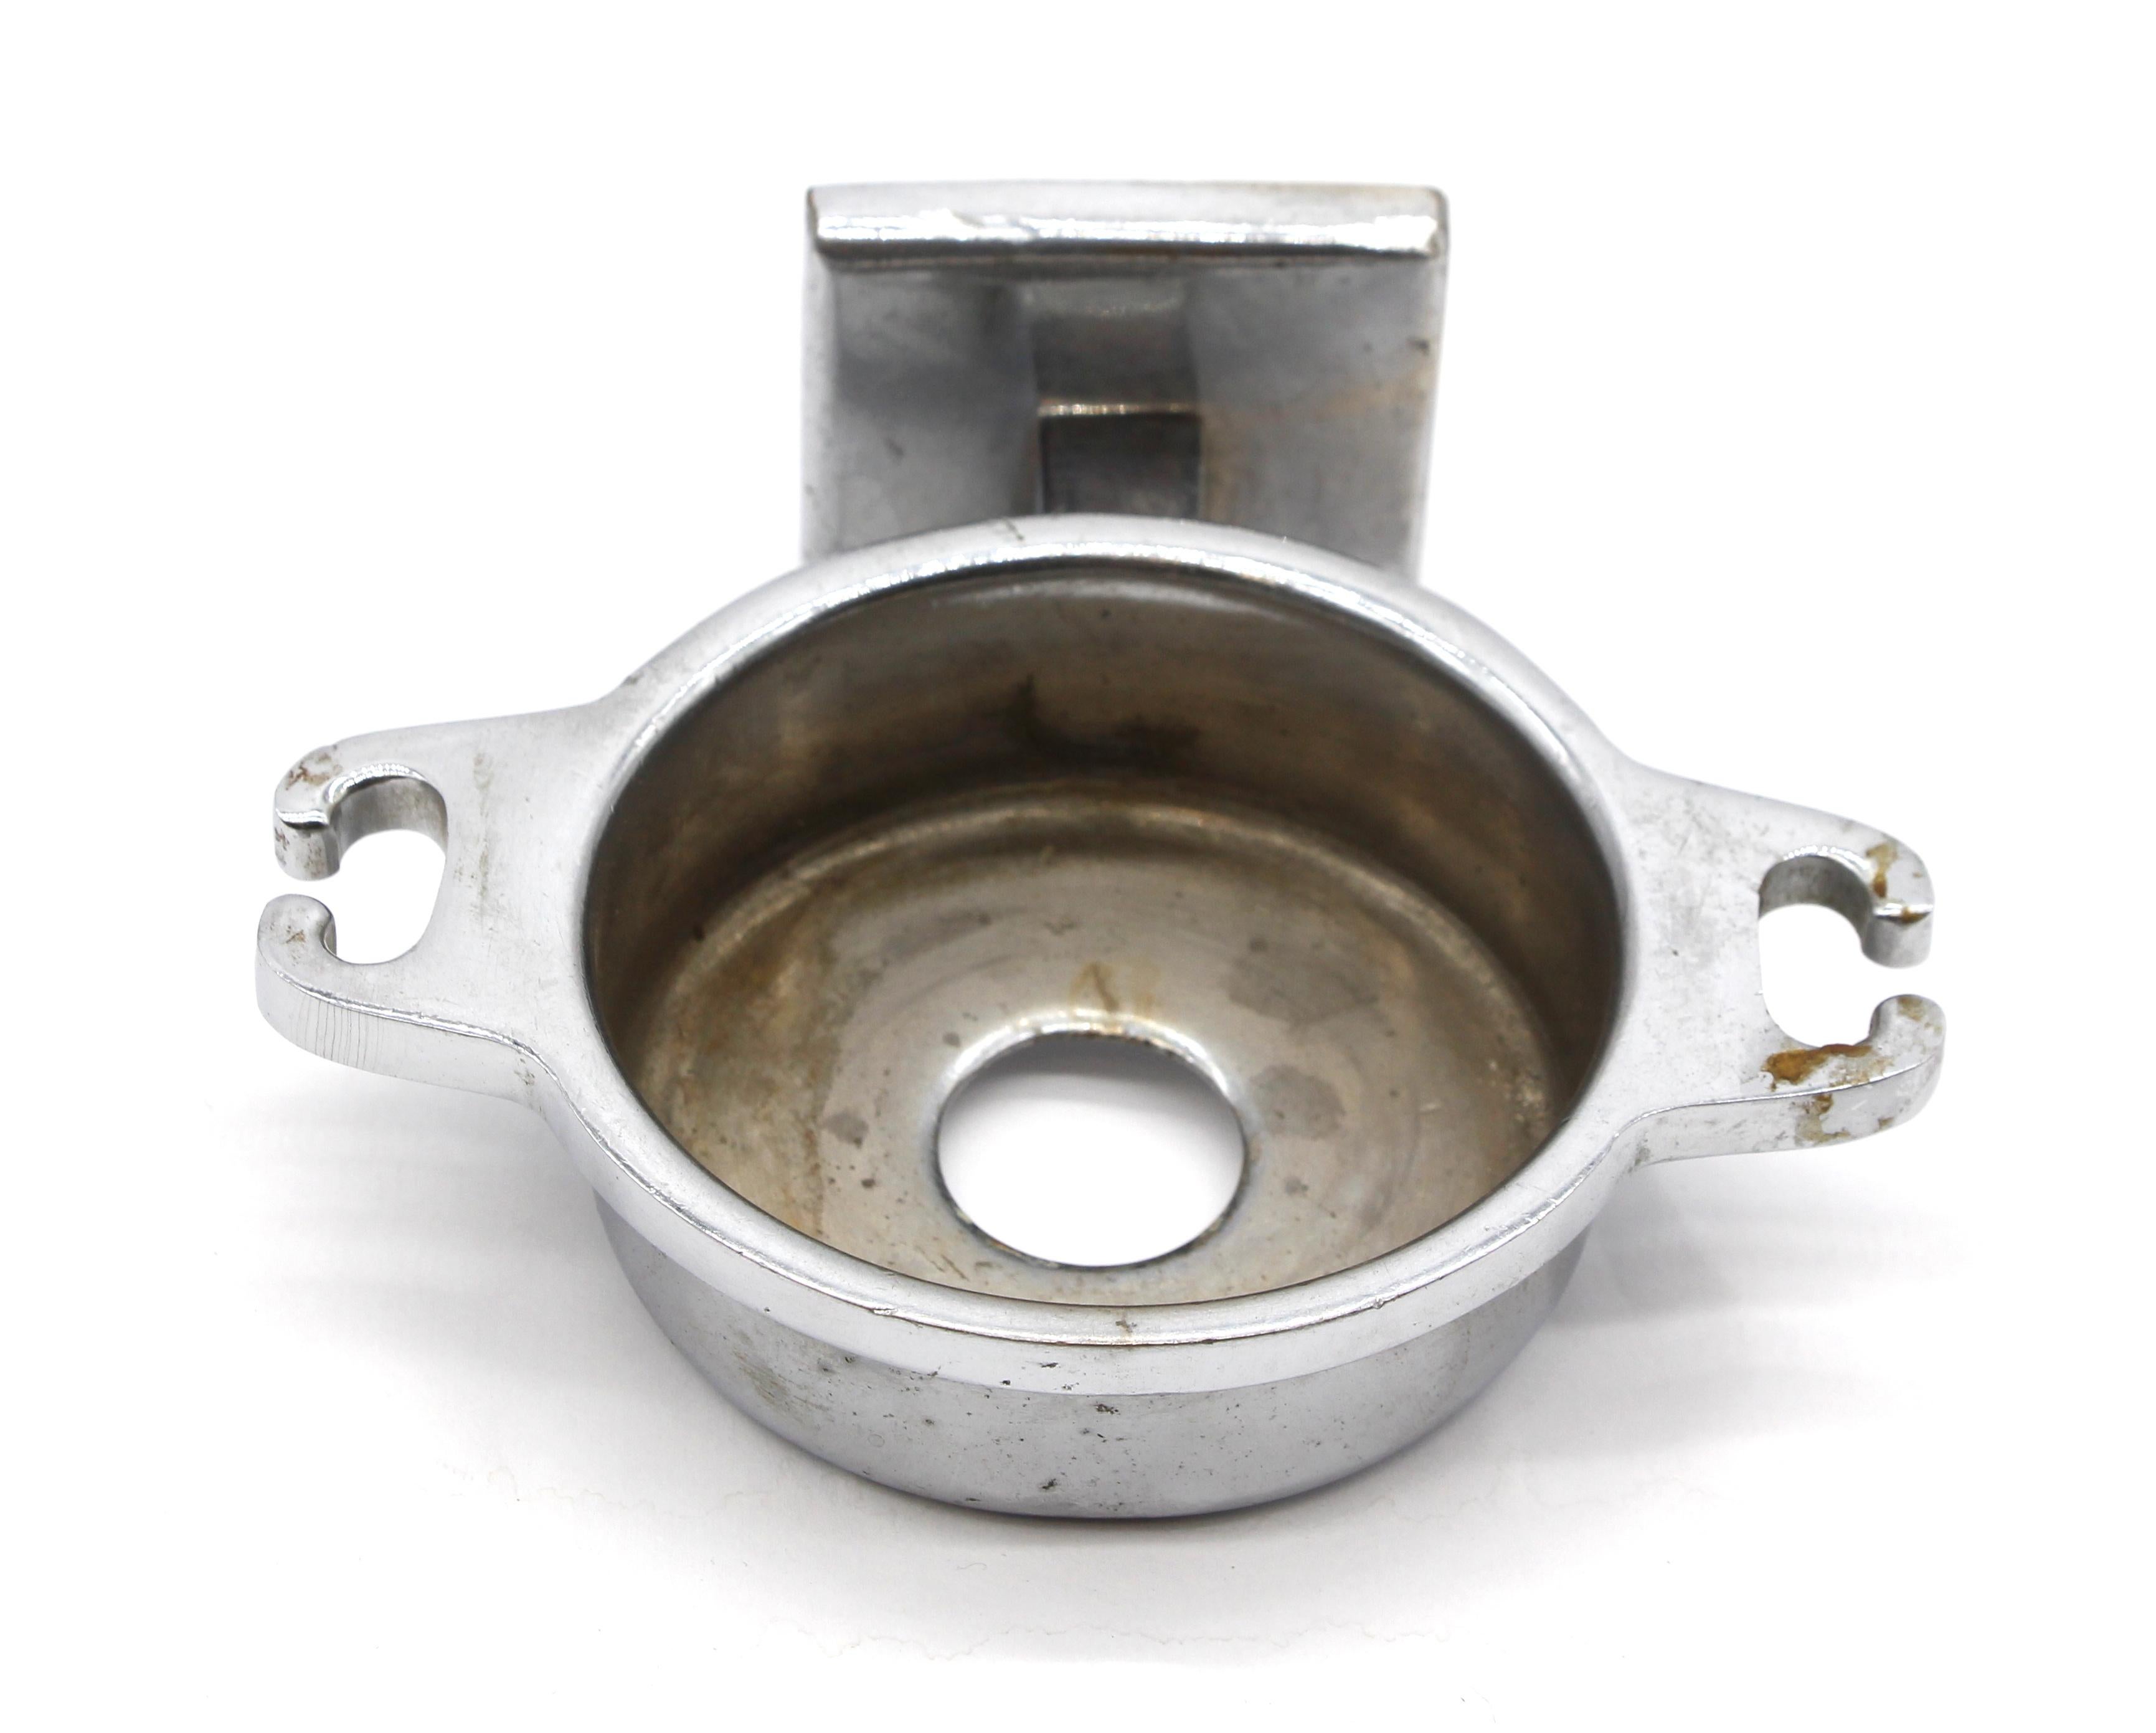 20th Century nickel over brass bathroom cup holder. Holds two toothbrushes. Small quantity available at time of posting. Drain hole in center. Small quantity available at time of posting. Priced each. Please inquire. Please note, this item is